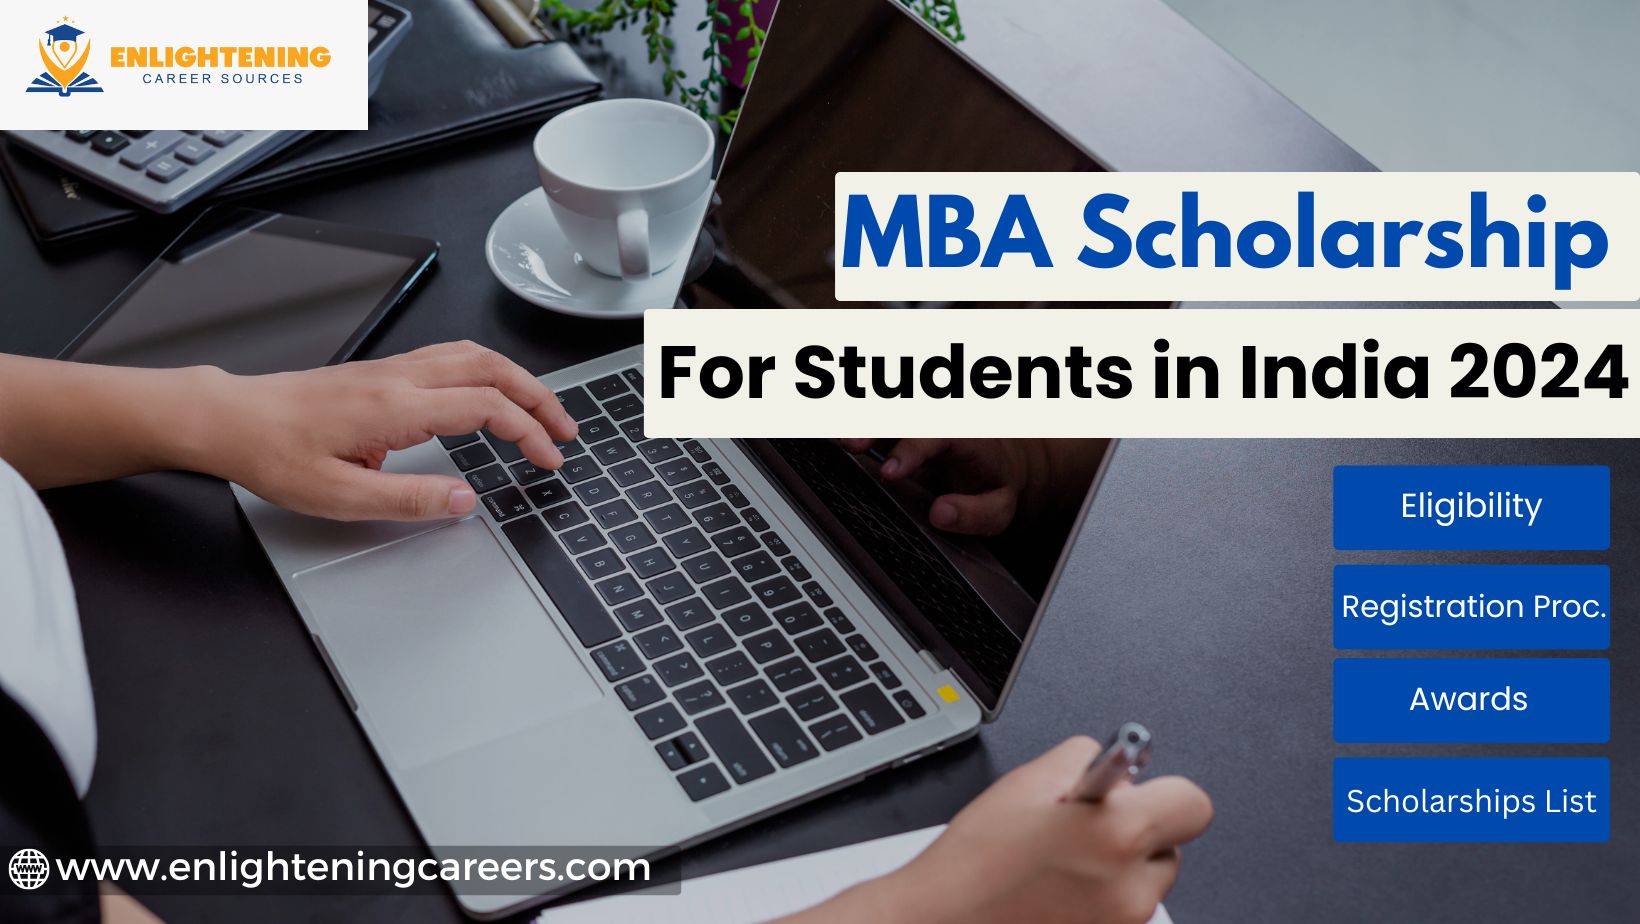 MBA scholarships for students